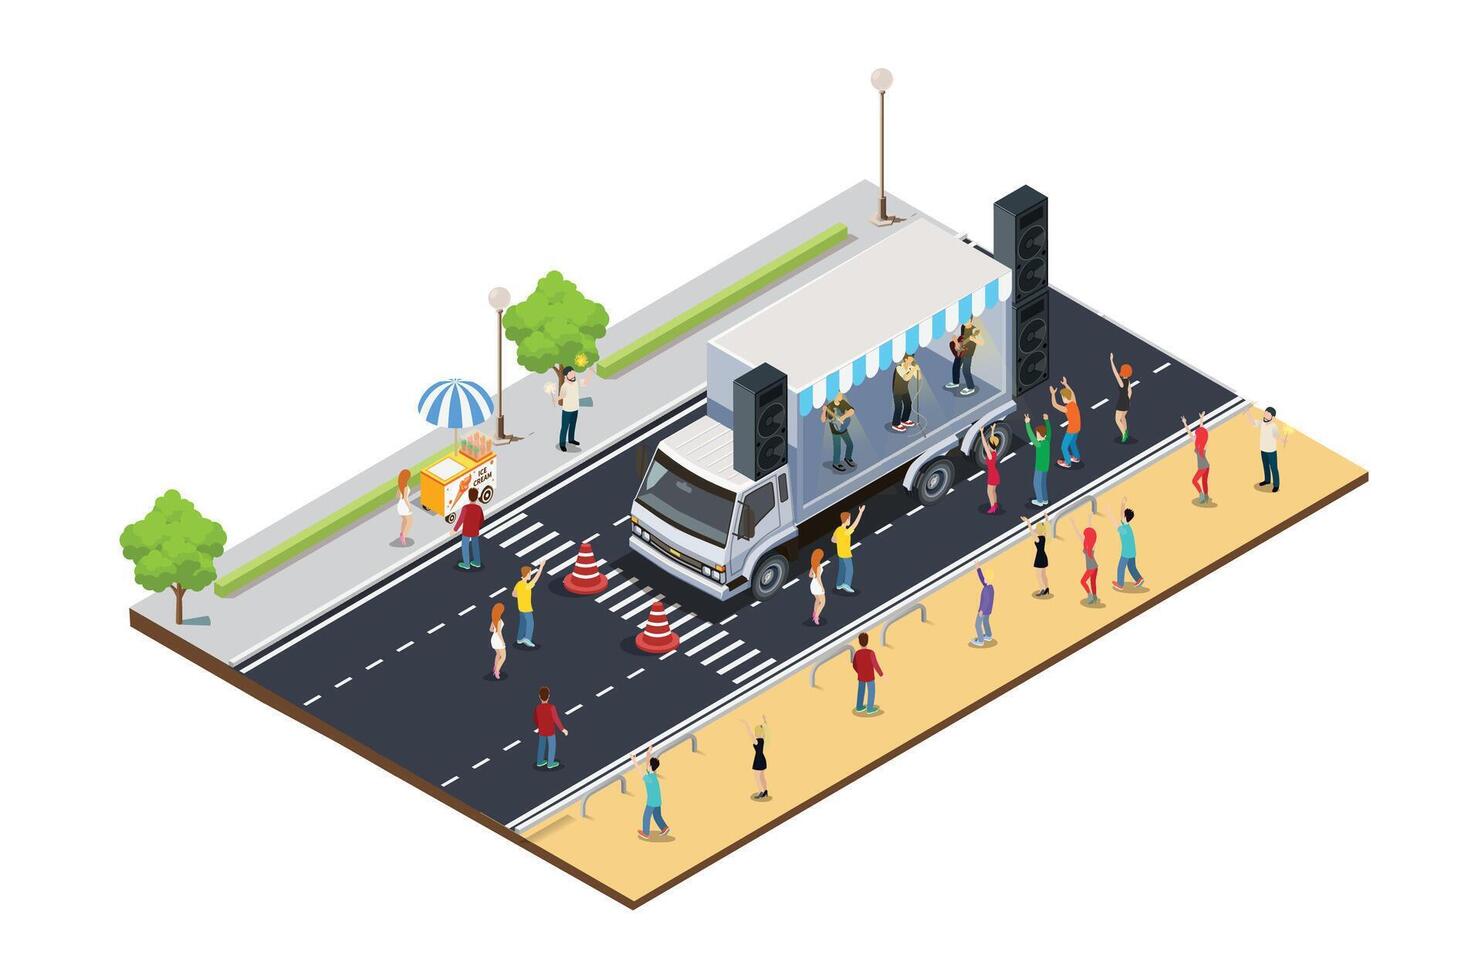 Music Festival Illustration on truck on the side of the road 3d Isometric View of Party Elements, people dancing, truck. Concert Background and Stage Landscape. Musical Event illustration vector